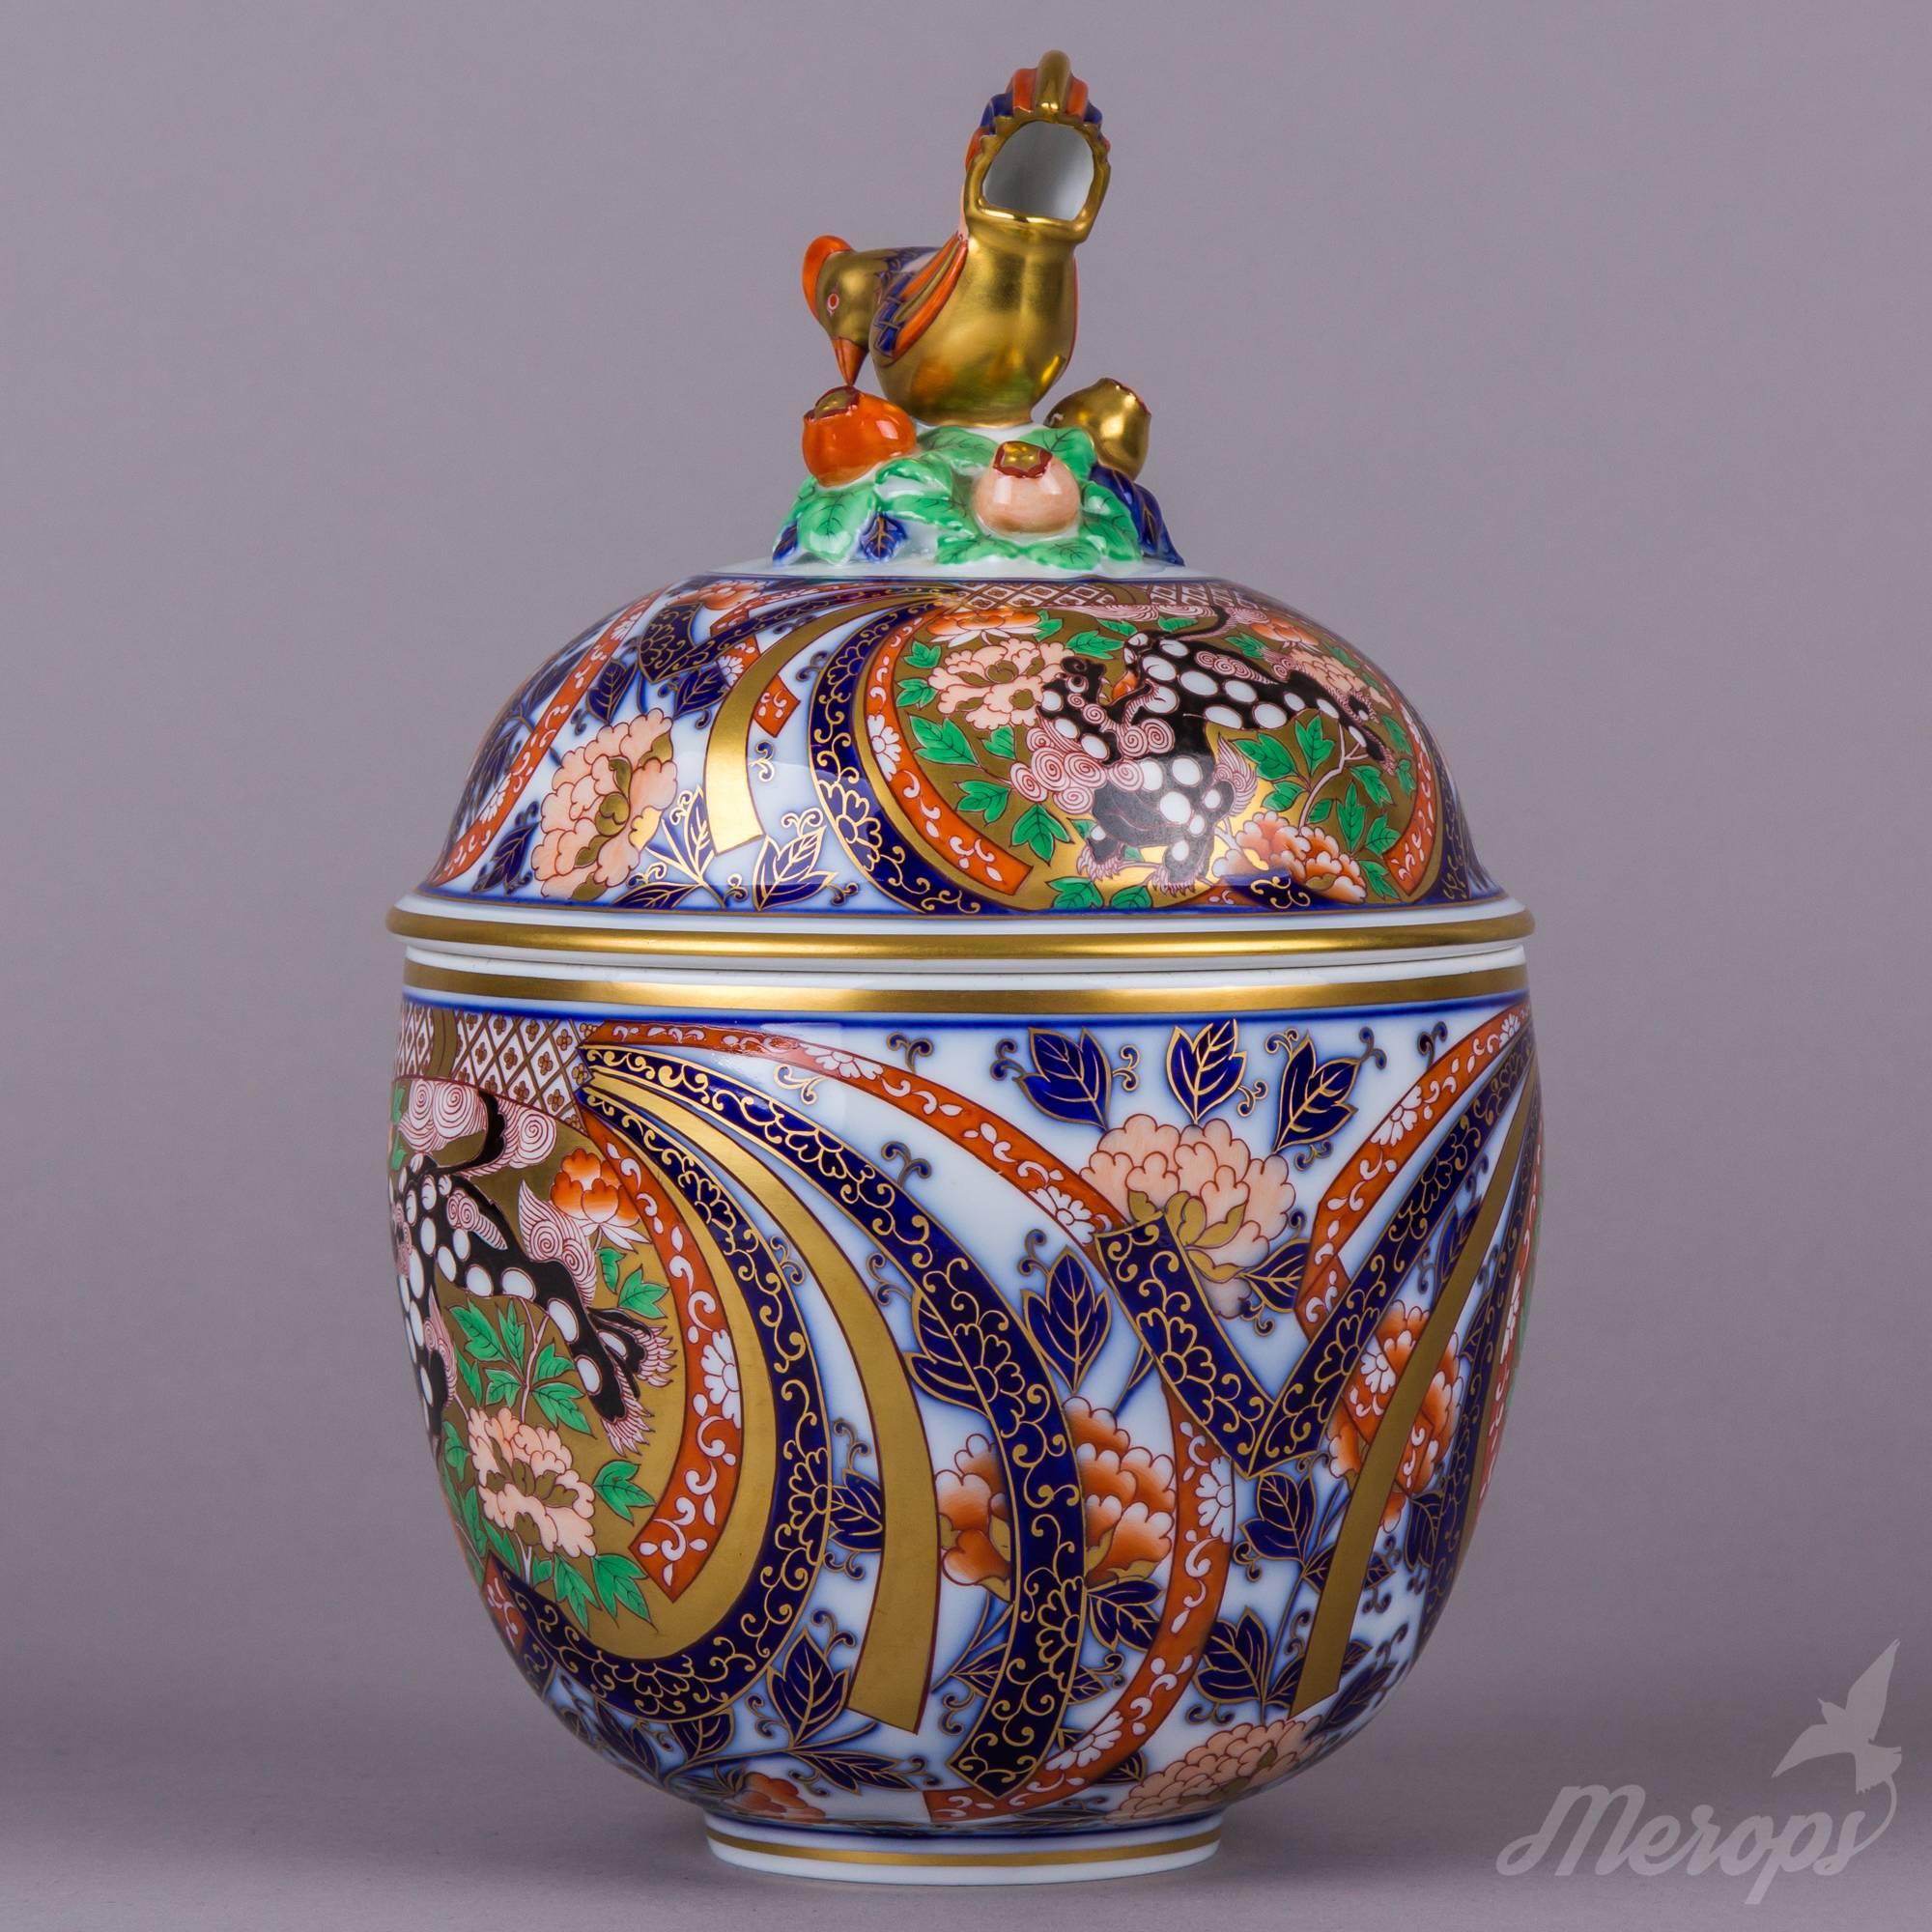 We ship this item worldwide for 70 USD with insurance. Shipping usually takes 3-7 business days. Express shipping with FedEx (two days) available for 100 USD.

Manufacturer: Herend porcelain manufactory (Hungary).
Quality: Hand-painted, 1st